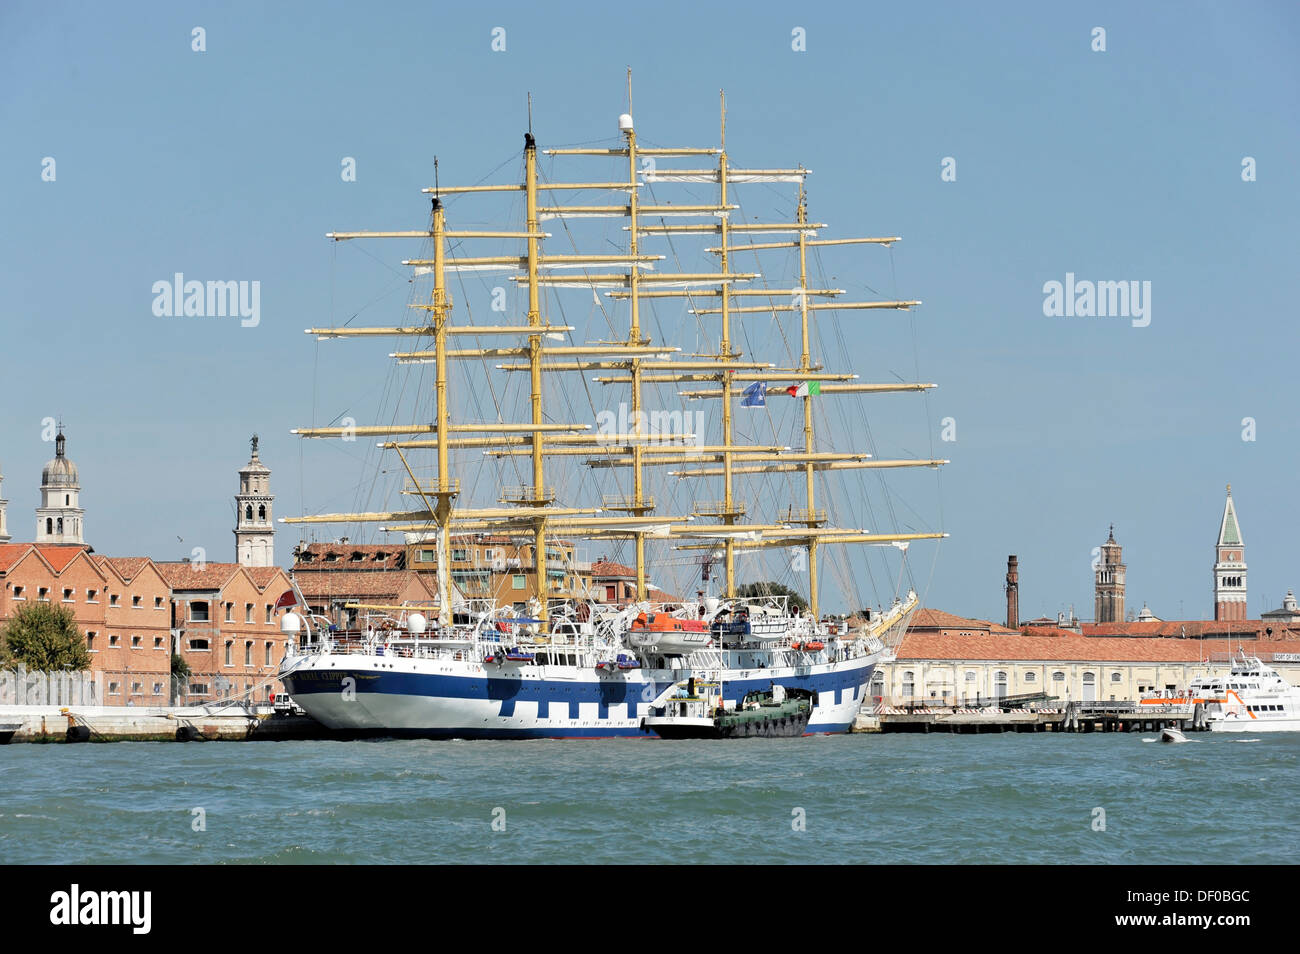 Cruise ship, Royal Clipper, 133.74m long, built in 1909, 227 passengers, at the pier in Venice, Veneto, Italy, Europe Stock Photo